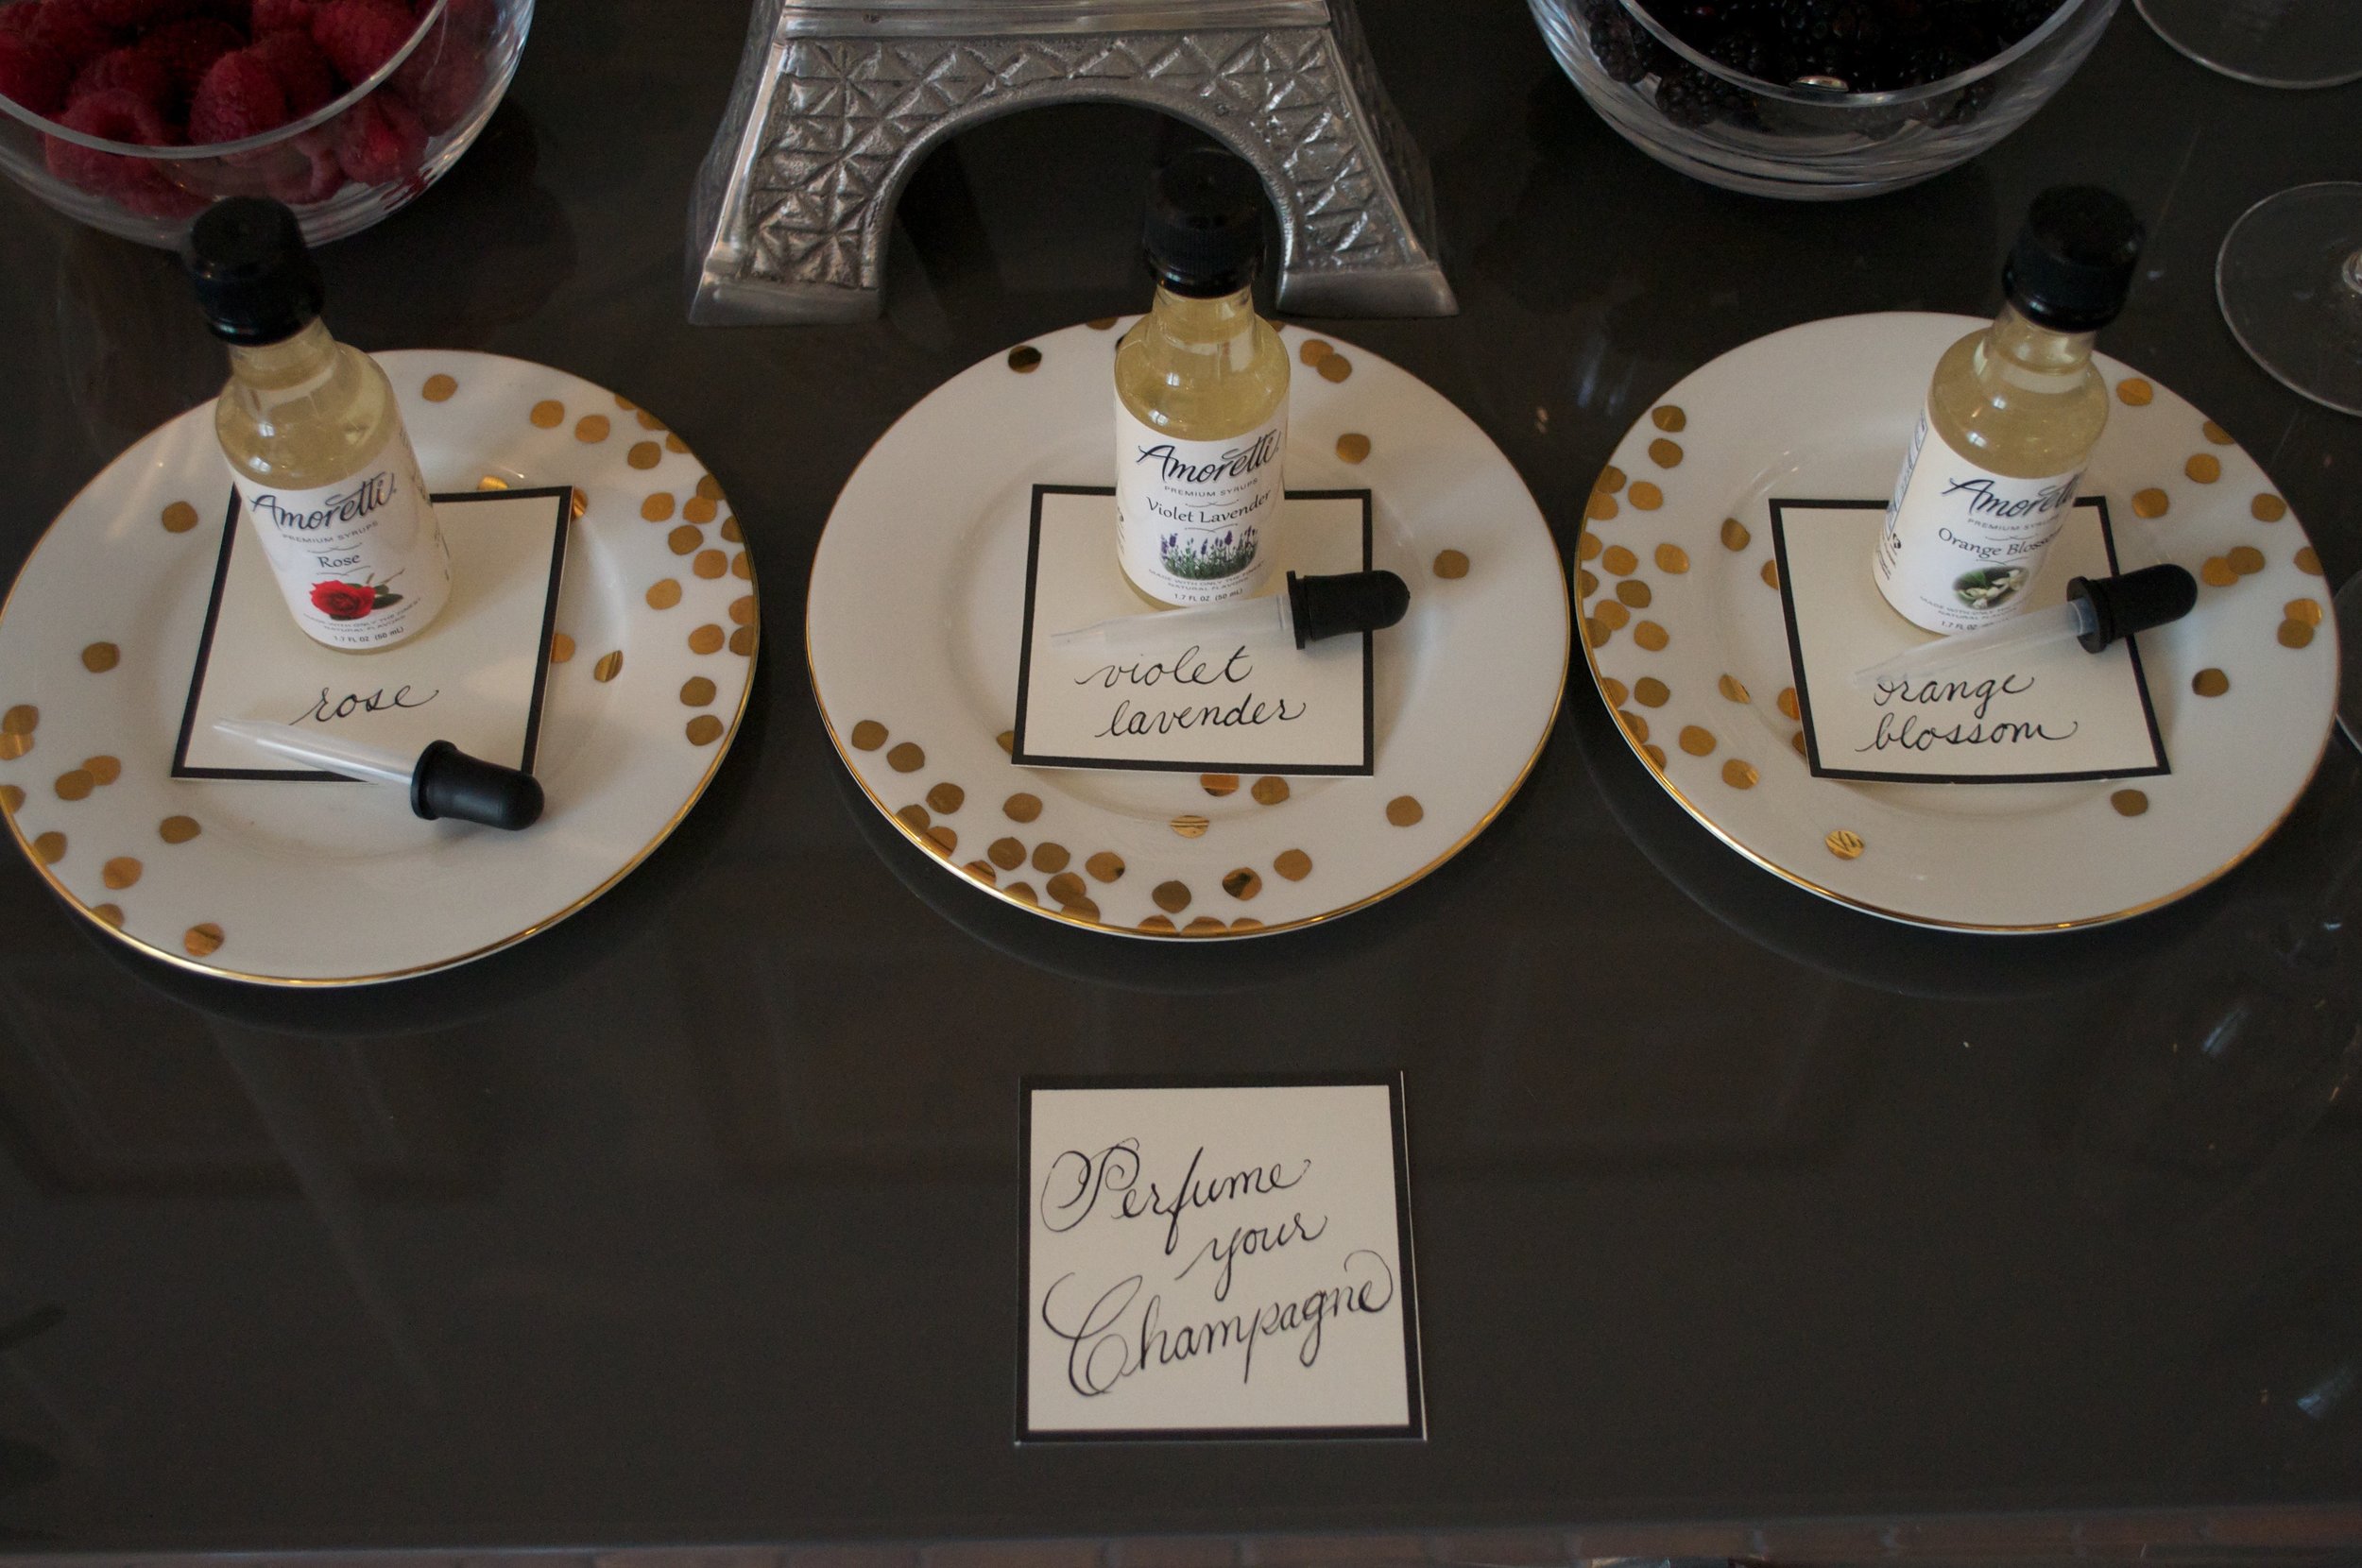 Continuing with the perfume theme, I gave our guests a way to "perfume" their bubbles by adding a few drops of orange blossom, violet lavender, and rose syrups.